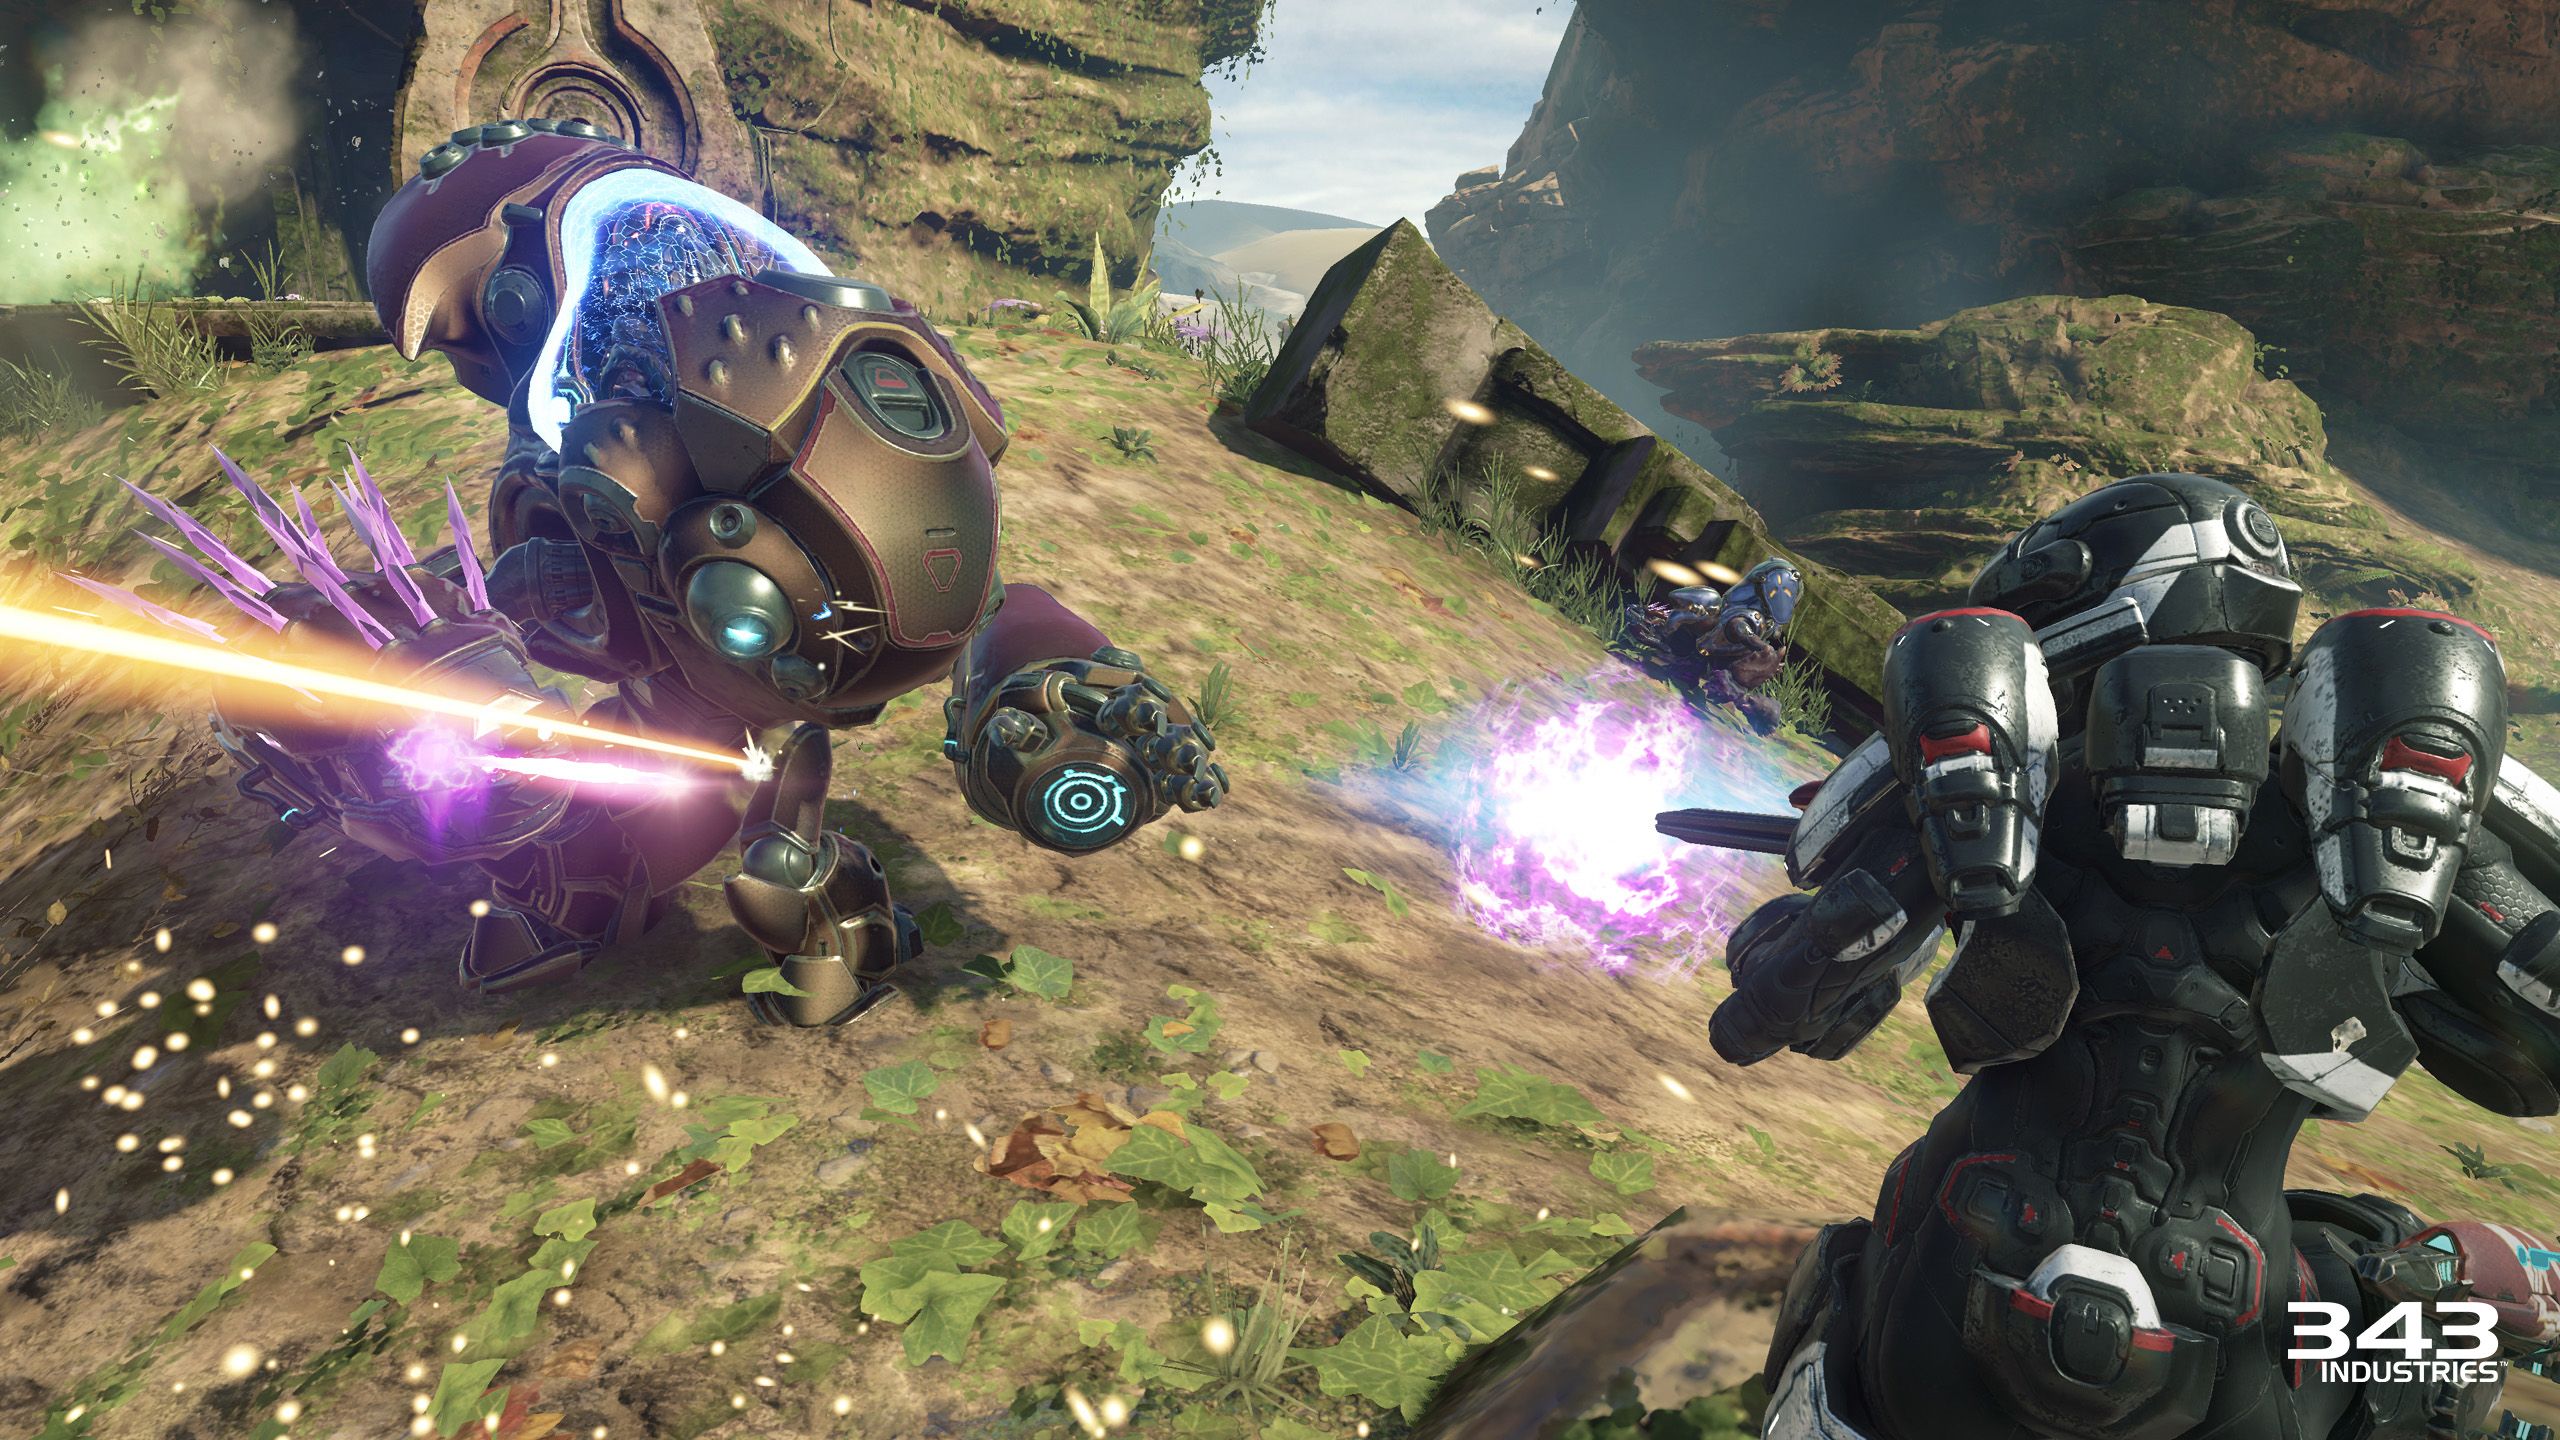 Halo 5: Guardians Is Getting a Grunt in a Mech Suit.